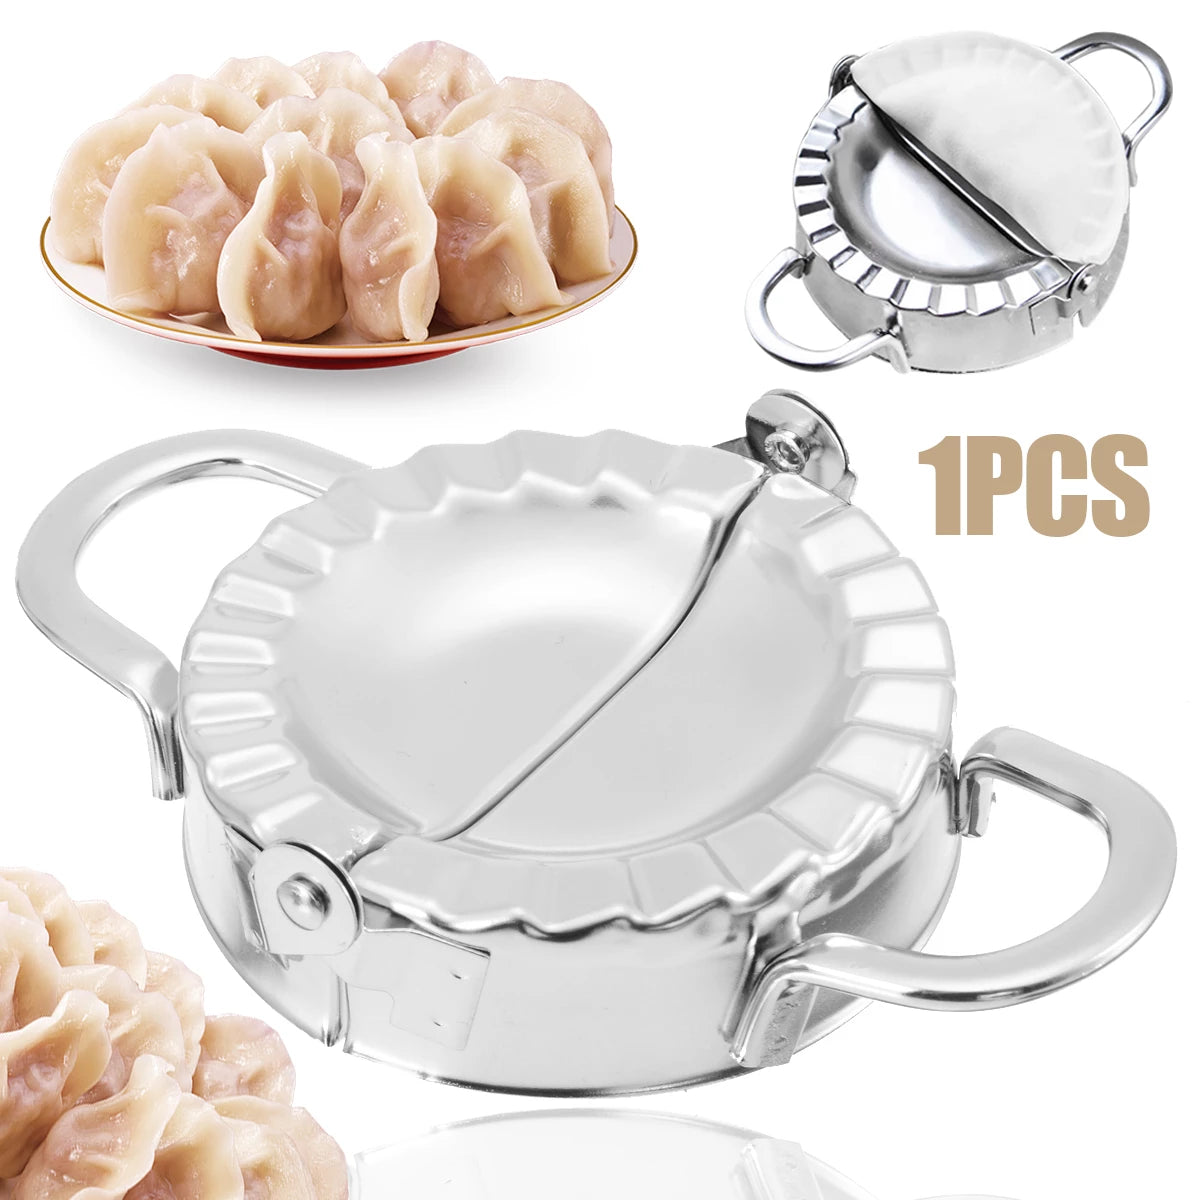 Stainless Steel Dumpling / Pastry Mould